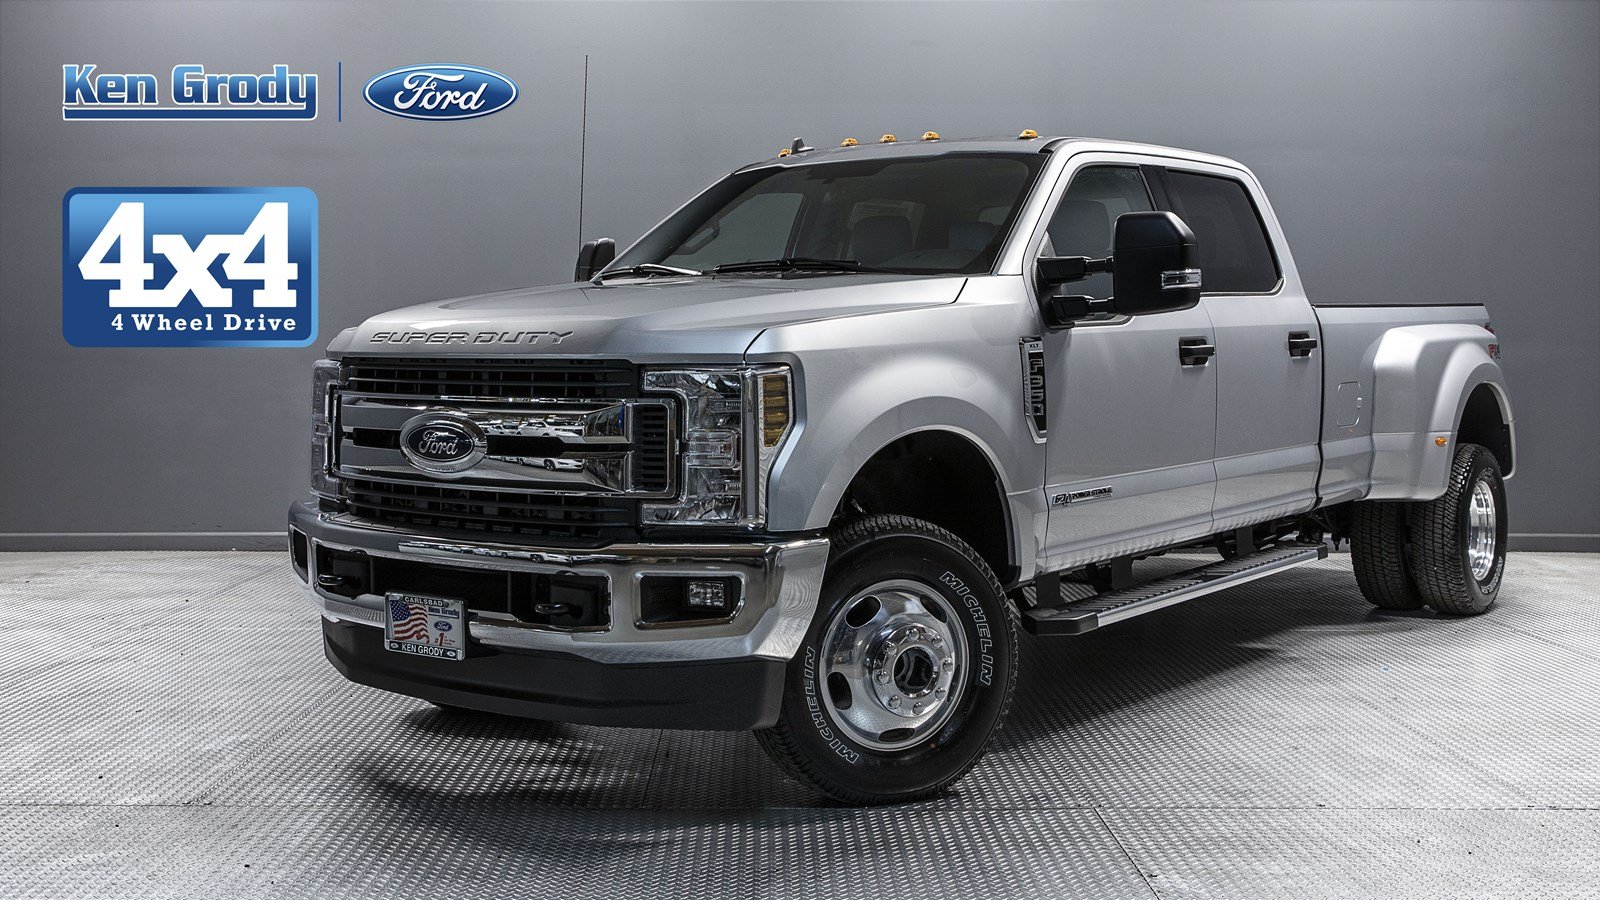 New 2019 Ford Super Duty F 350 Drw Xlt Crew Cab Pickup In Buena Park